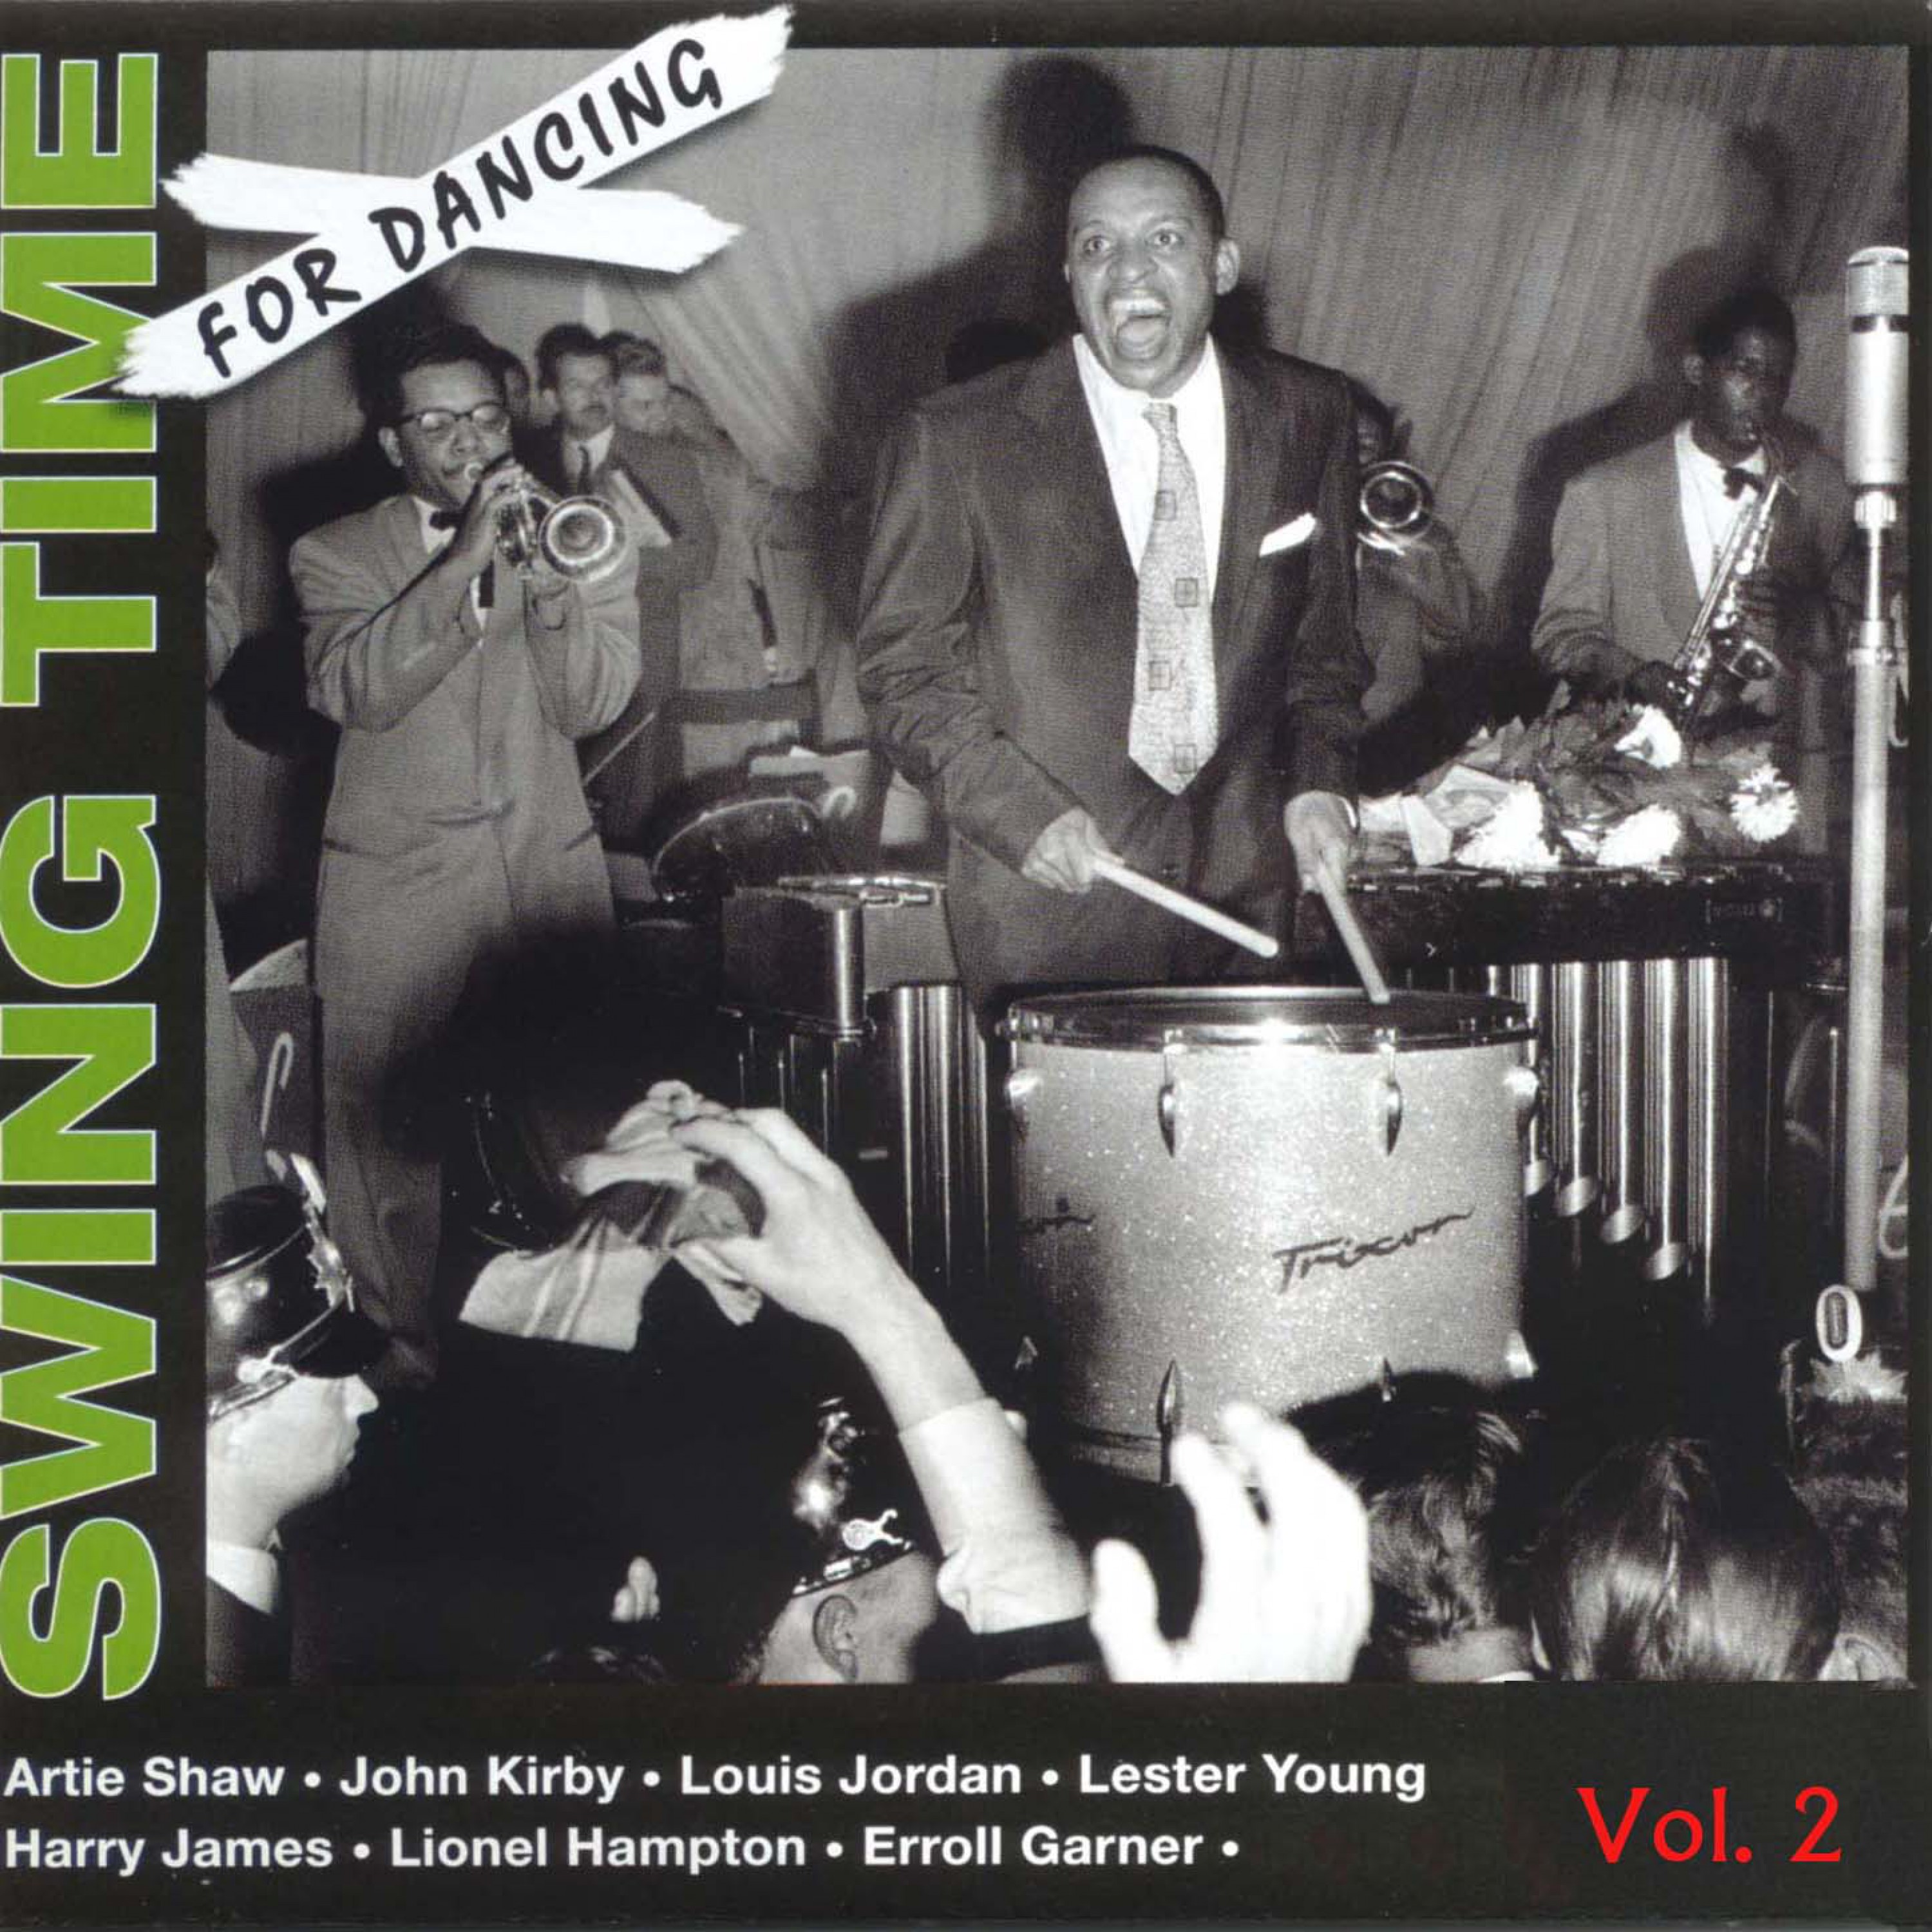 Swing Time for Dancing Vol. 2